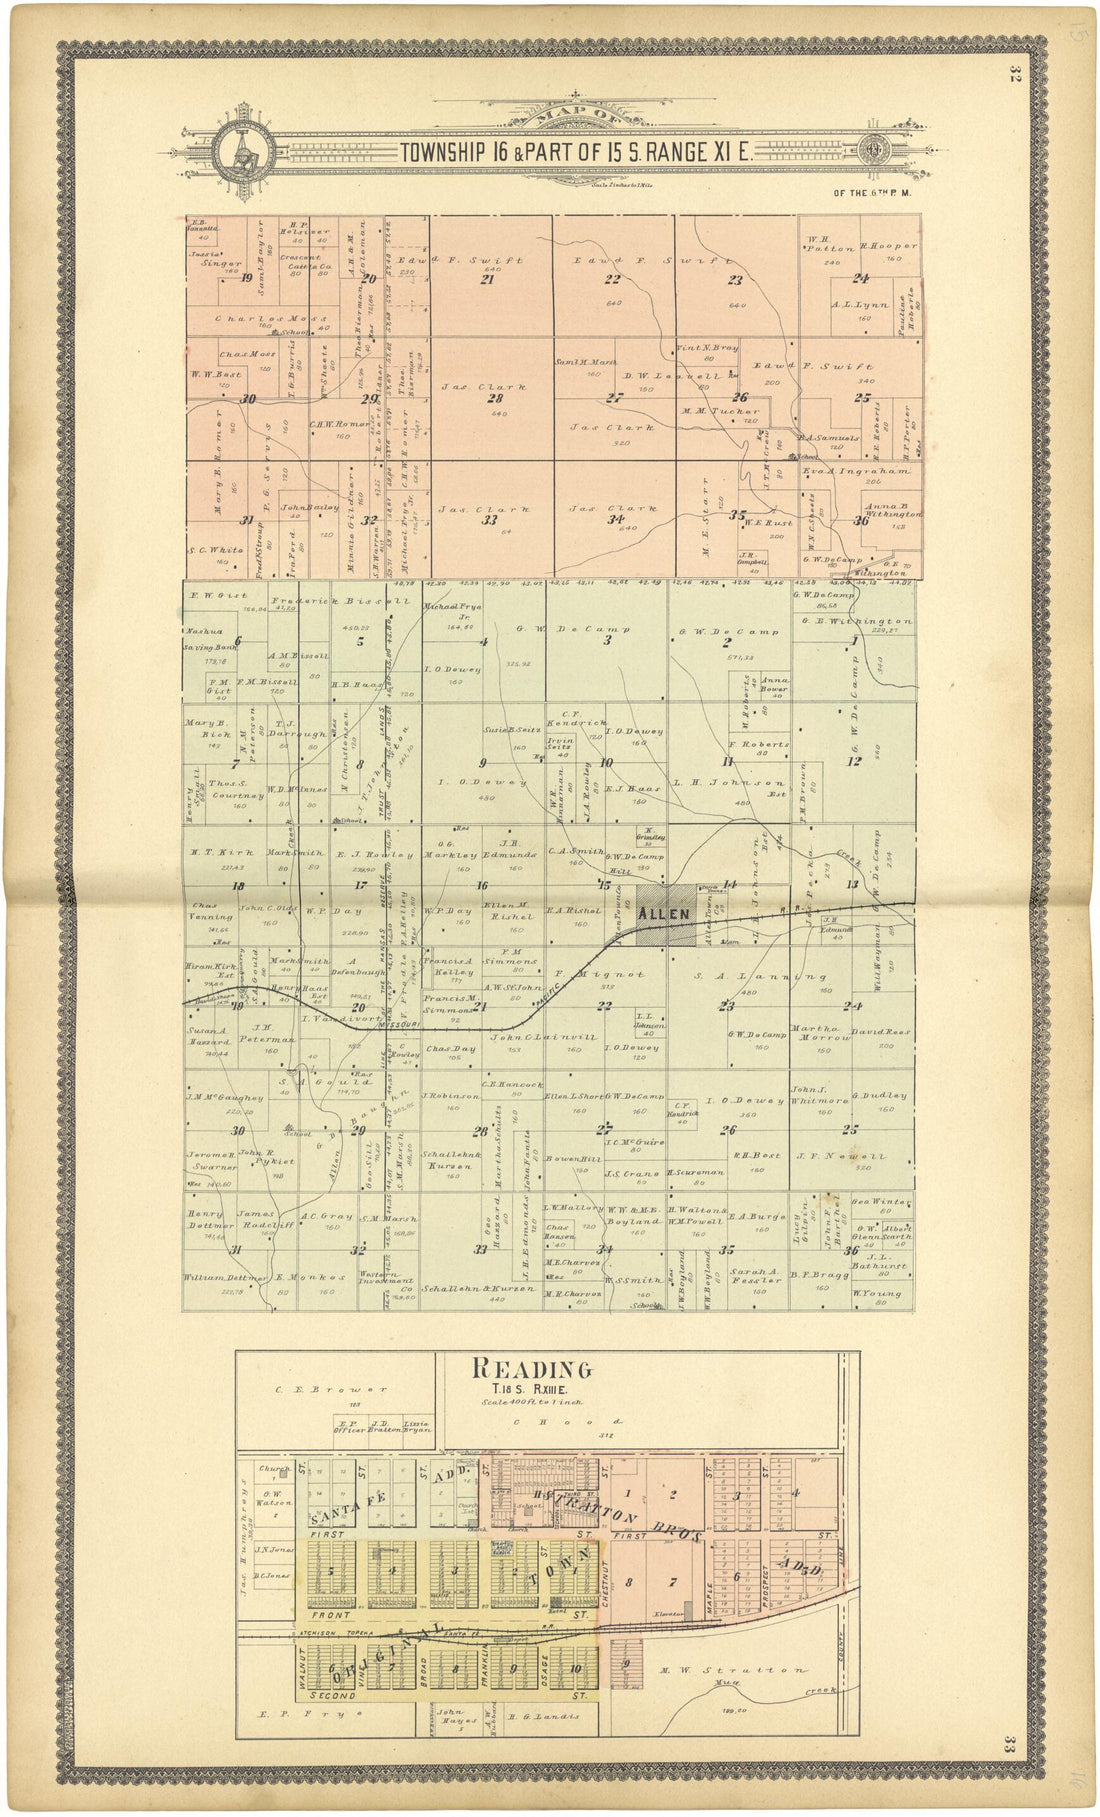 This old map of Map of Township 16 &amp; Part of 15 S. Range XI E. from Standard Atlas of Lyon County, Kansas from 1901 was created by  Geo. A. Ogle &amp; Co in 1901